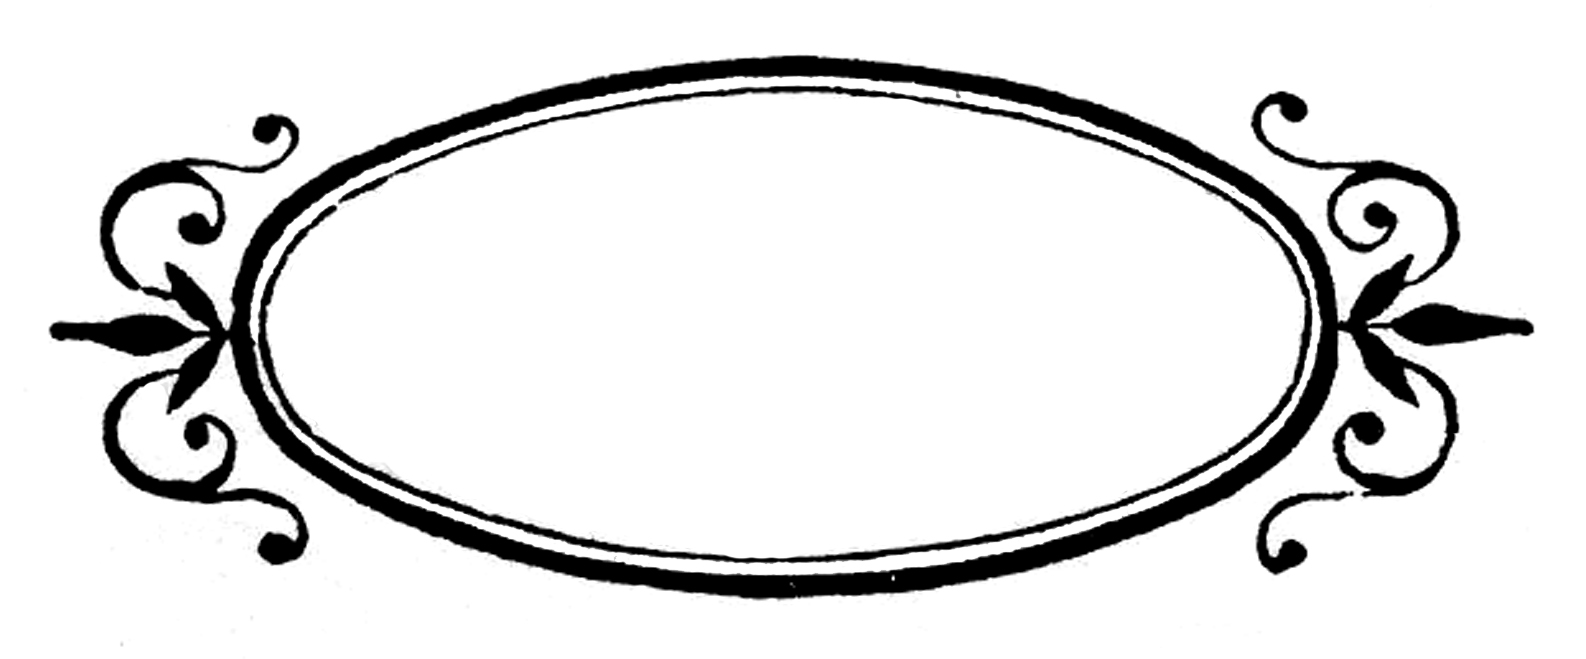 Oval Frame Clip Art - Free Clipart Images